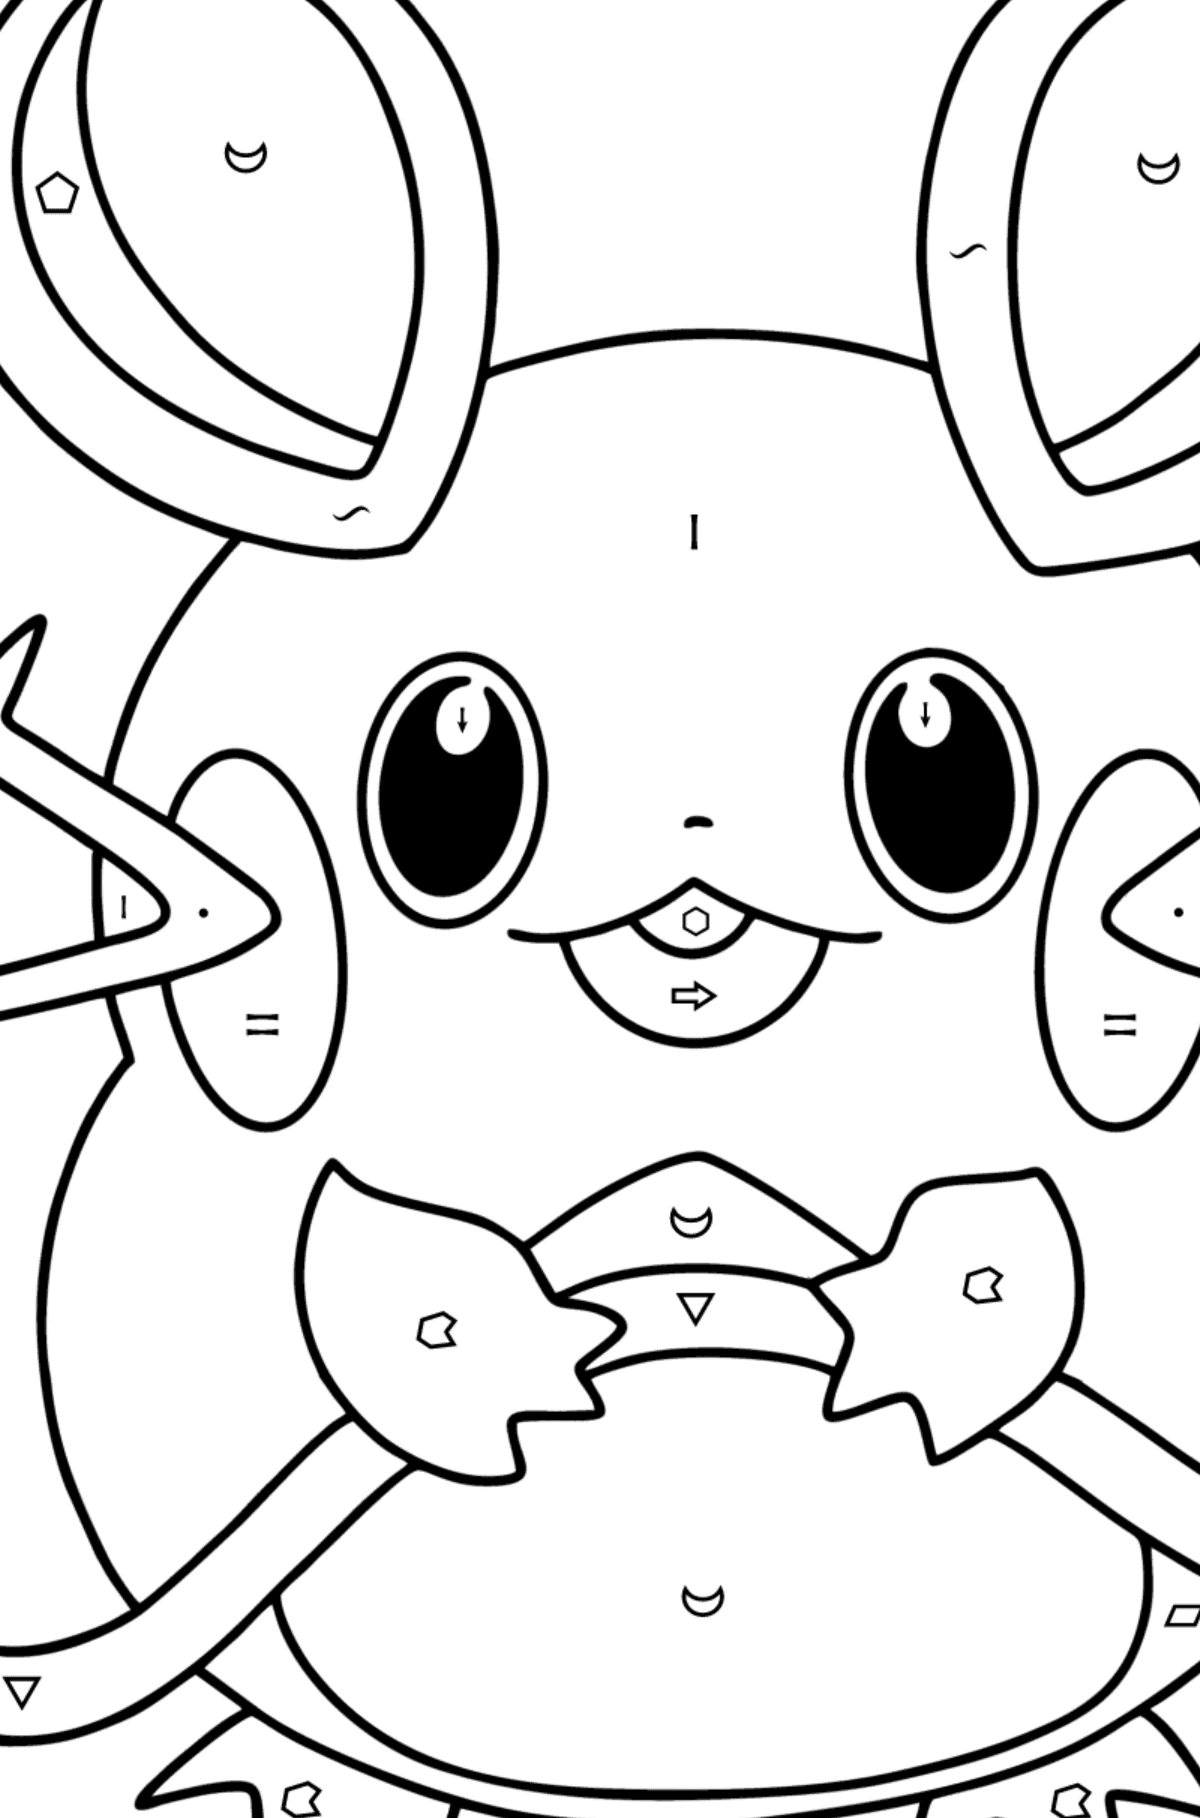 Colouring page Pokémon X and Y Dedenne - Coloring by Symbols and Geometric Shapes for Kids